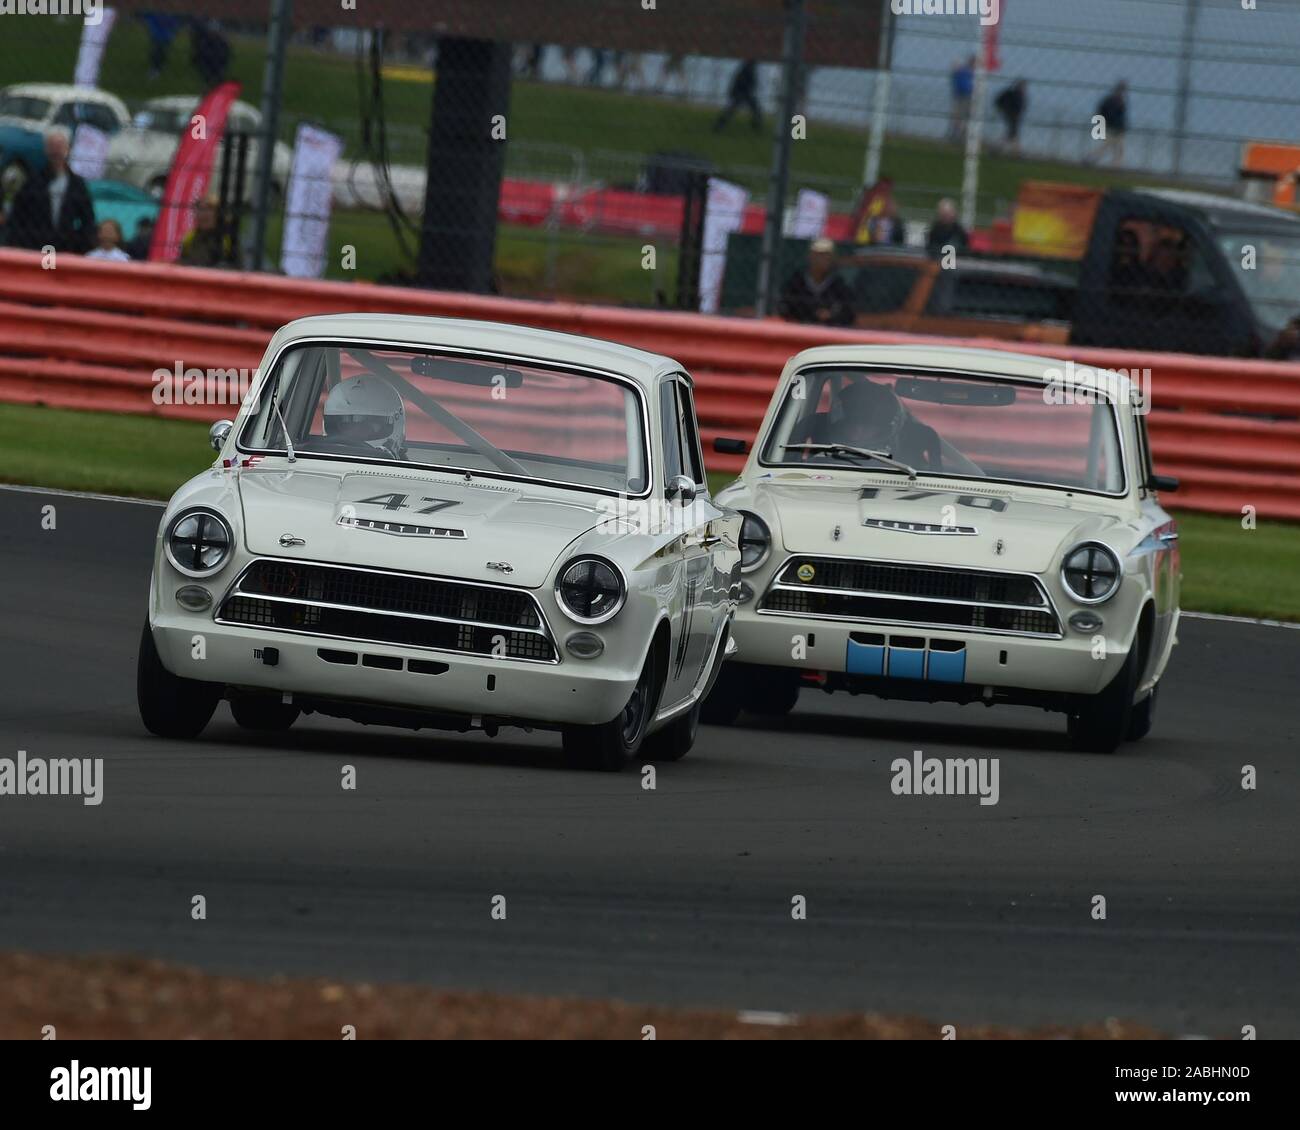 Martin Strommen, Ford Lotus Cortina, Marcus Jewell, Ford Lotus Cortina, Transatlantic Trophy for Pre '66 Touring Cars, Silverstone Classic, July 2019, Stock Photo